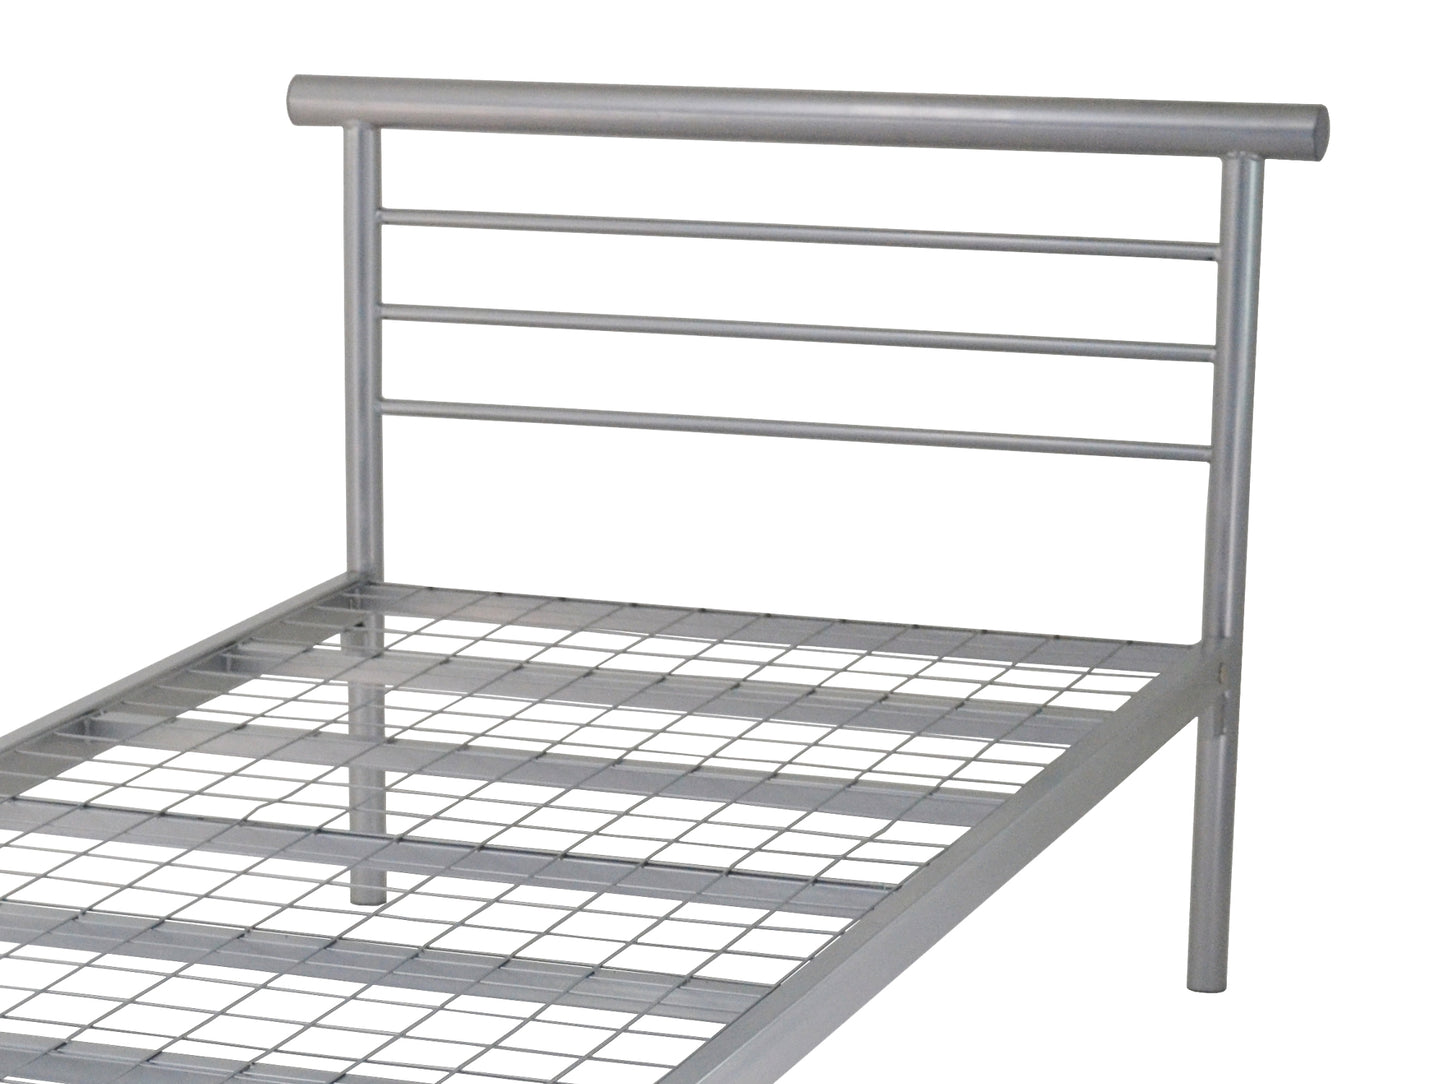 Contract Mesh Heavy Duty Metal Bed Frame in Silver